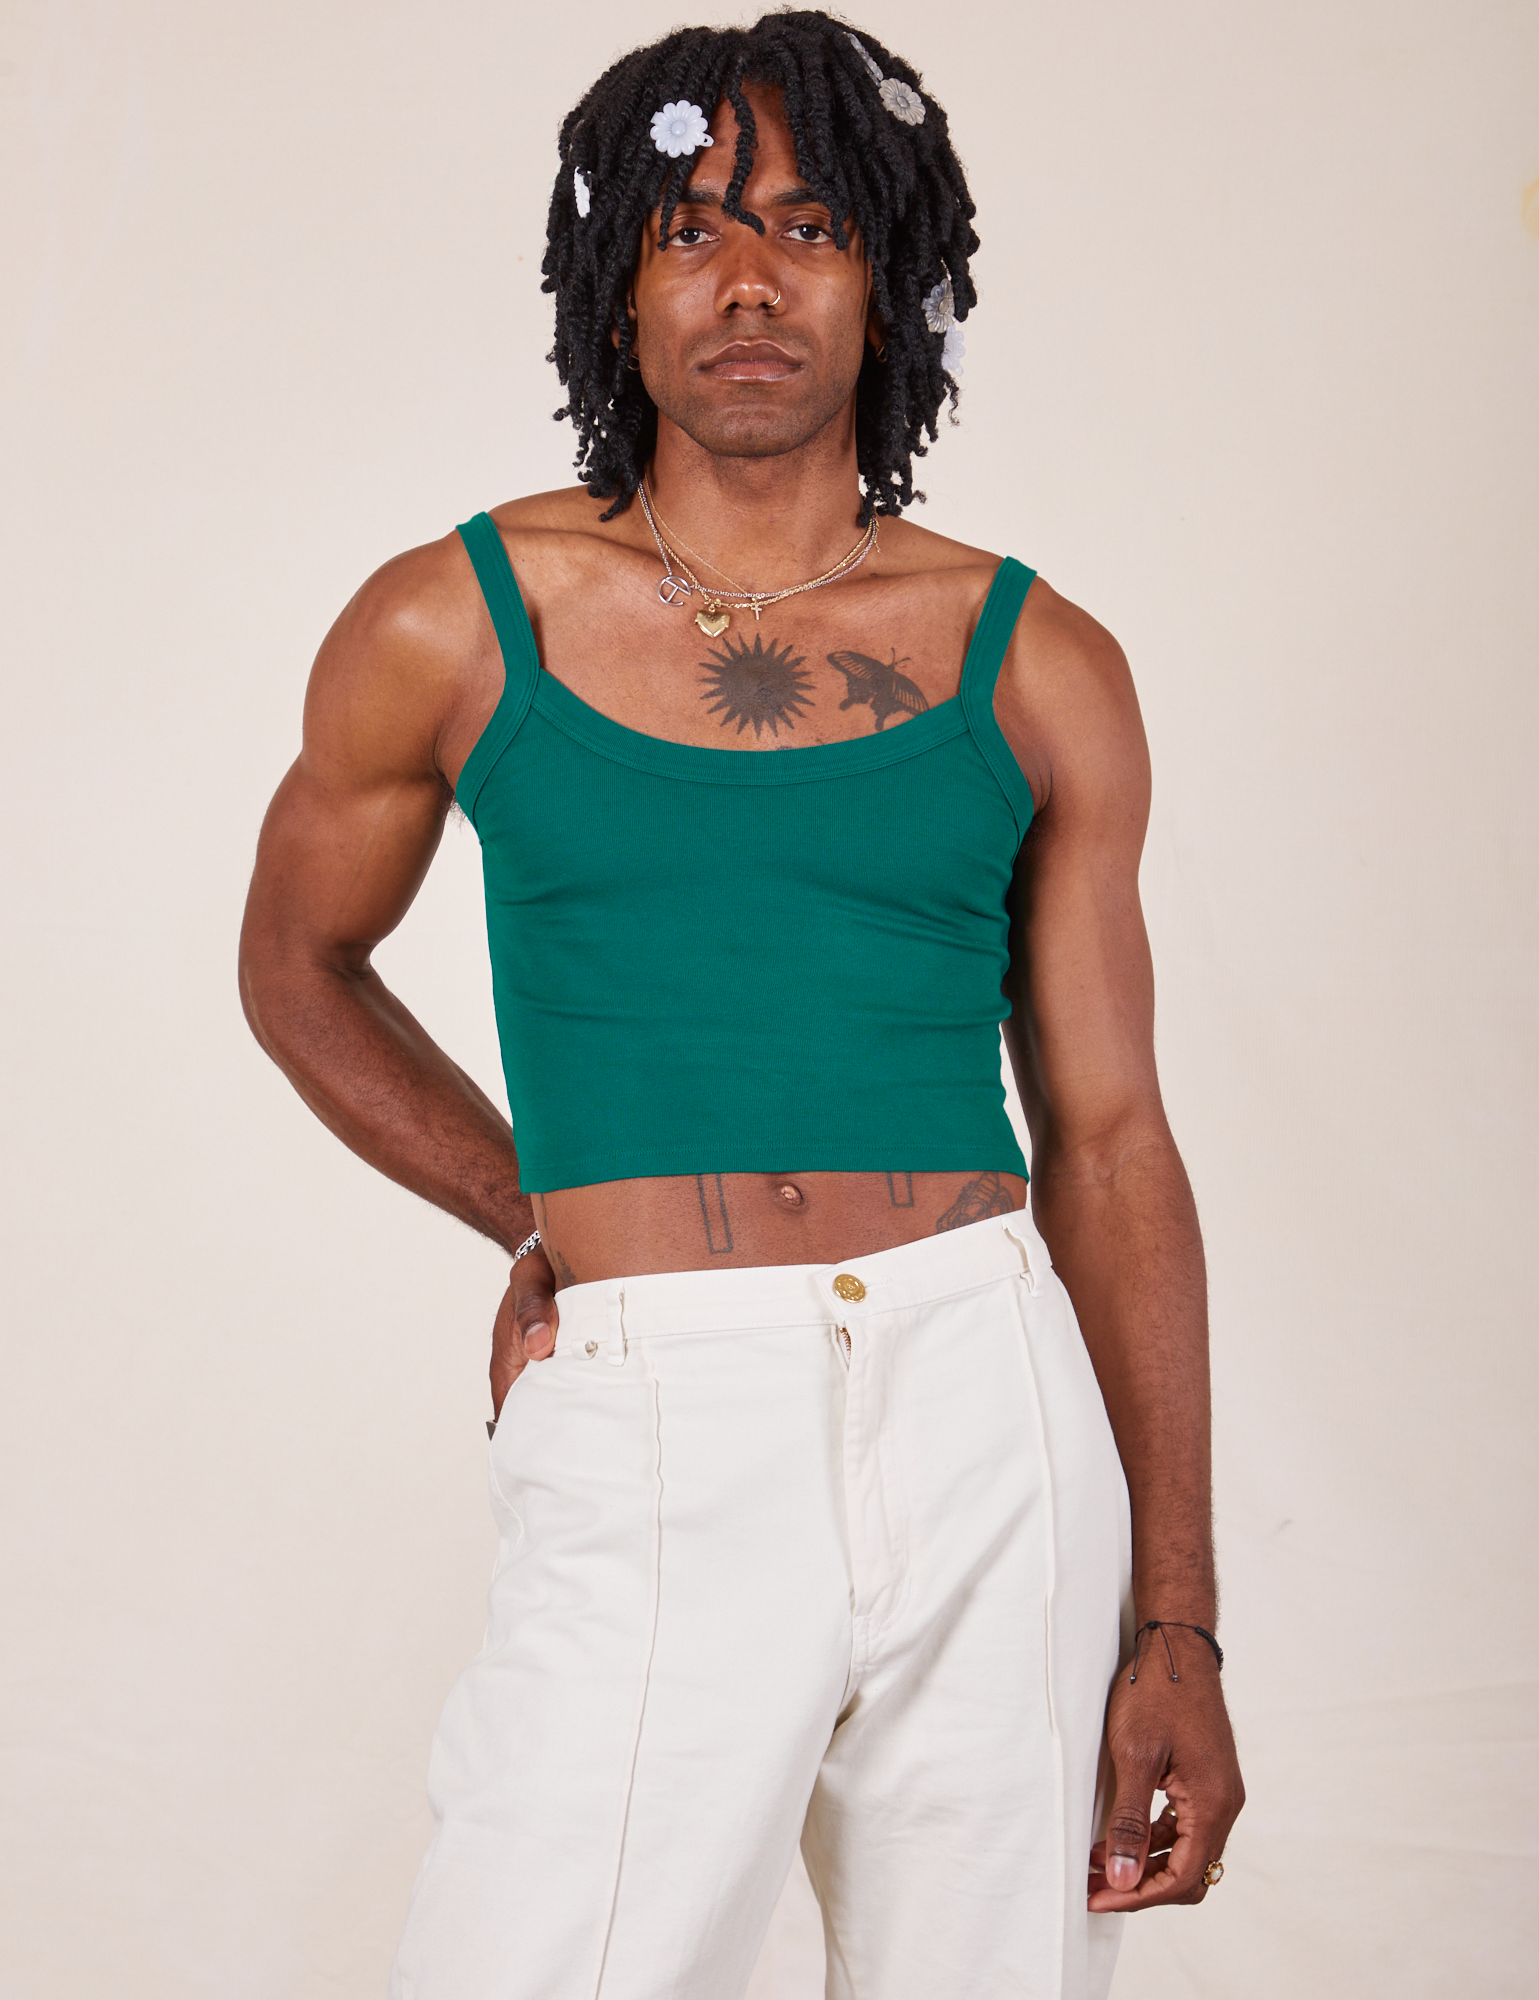 Jerrod is 6&#39;3&quot; and wearing S Cropped Cami in Hunter Green paired with vintage off-white Western Pants